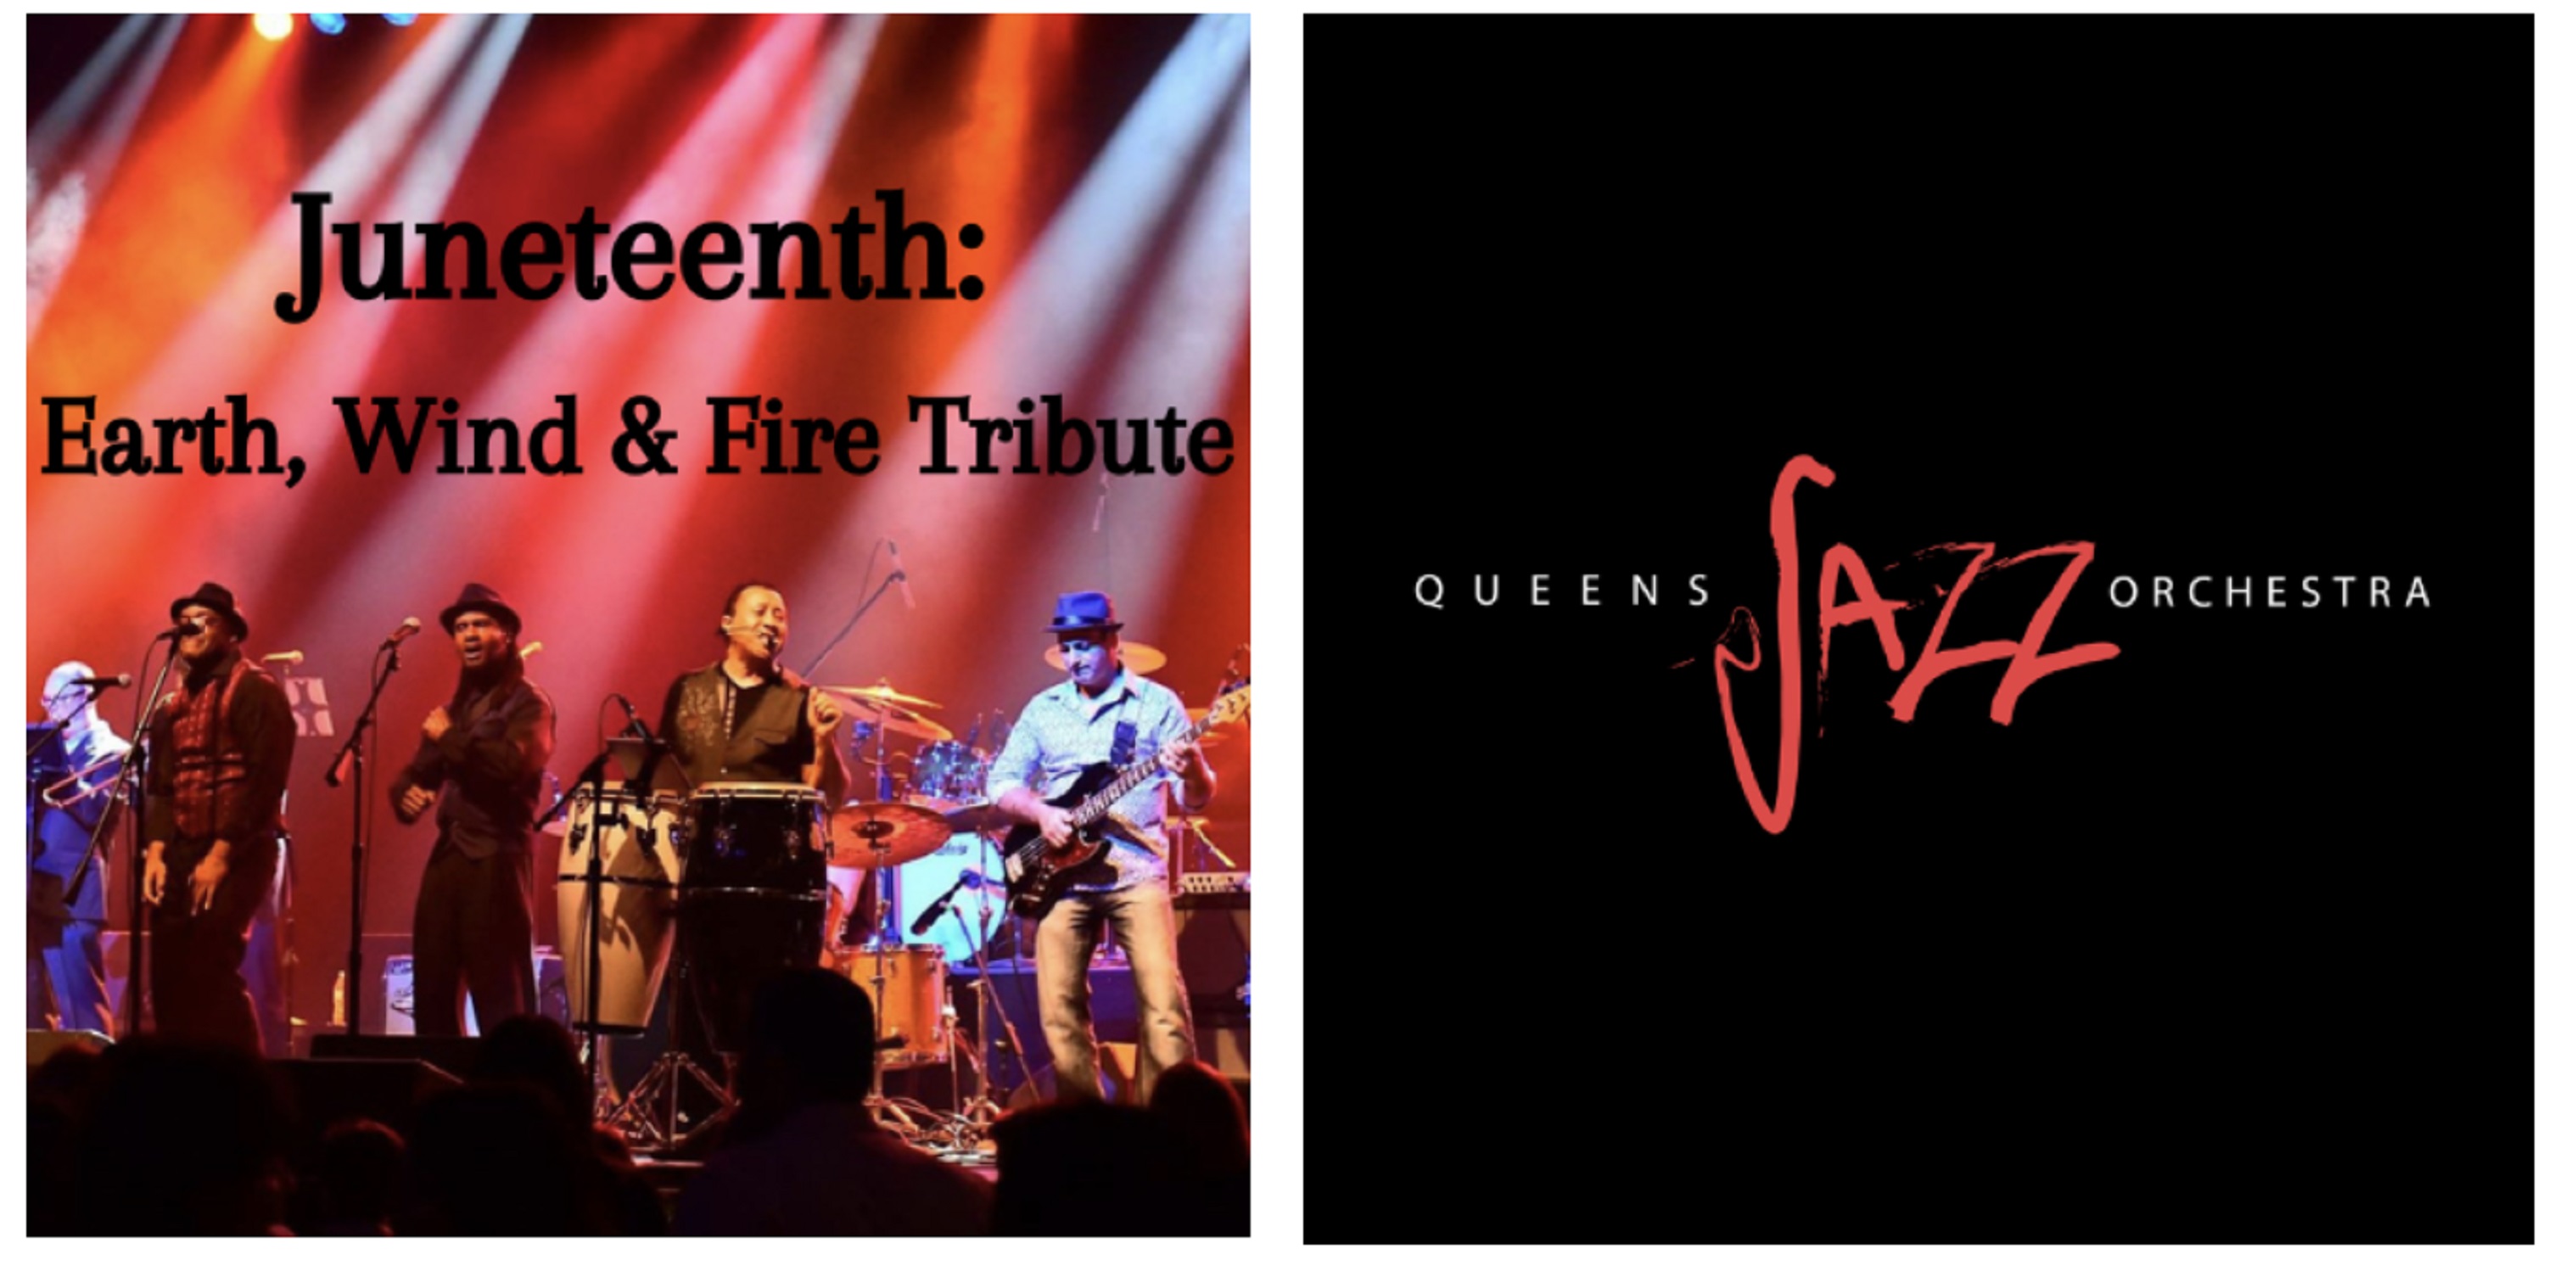 Flushing Town Hall Is Celebrating Juneteeth This Weekend By Tributing The Unifying Sounds Of Earth, Wind & Fire!